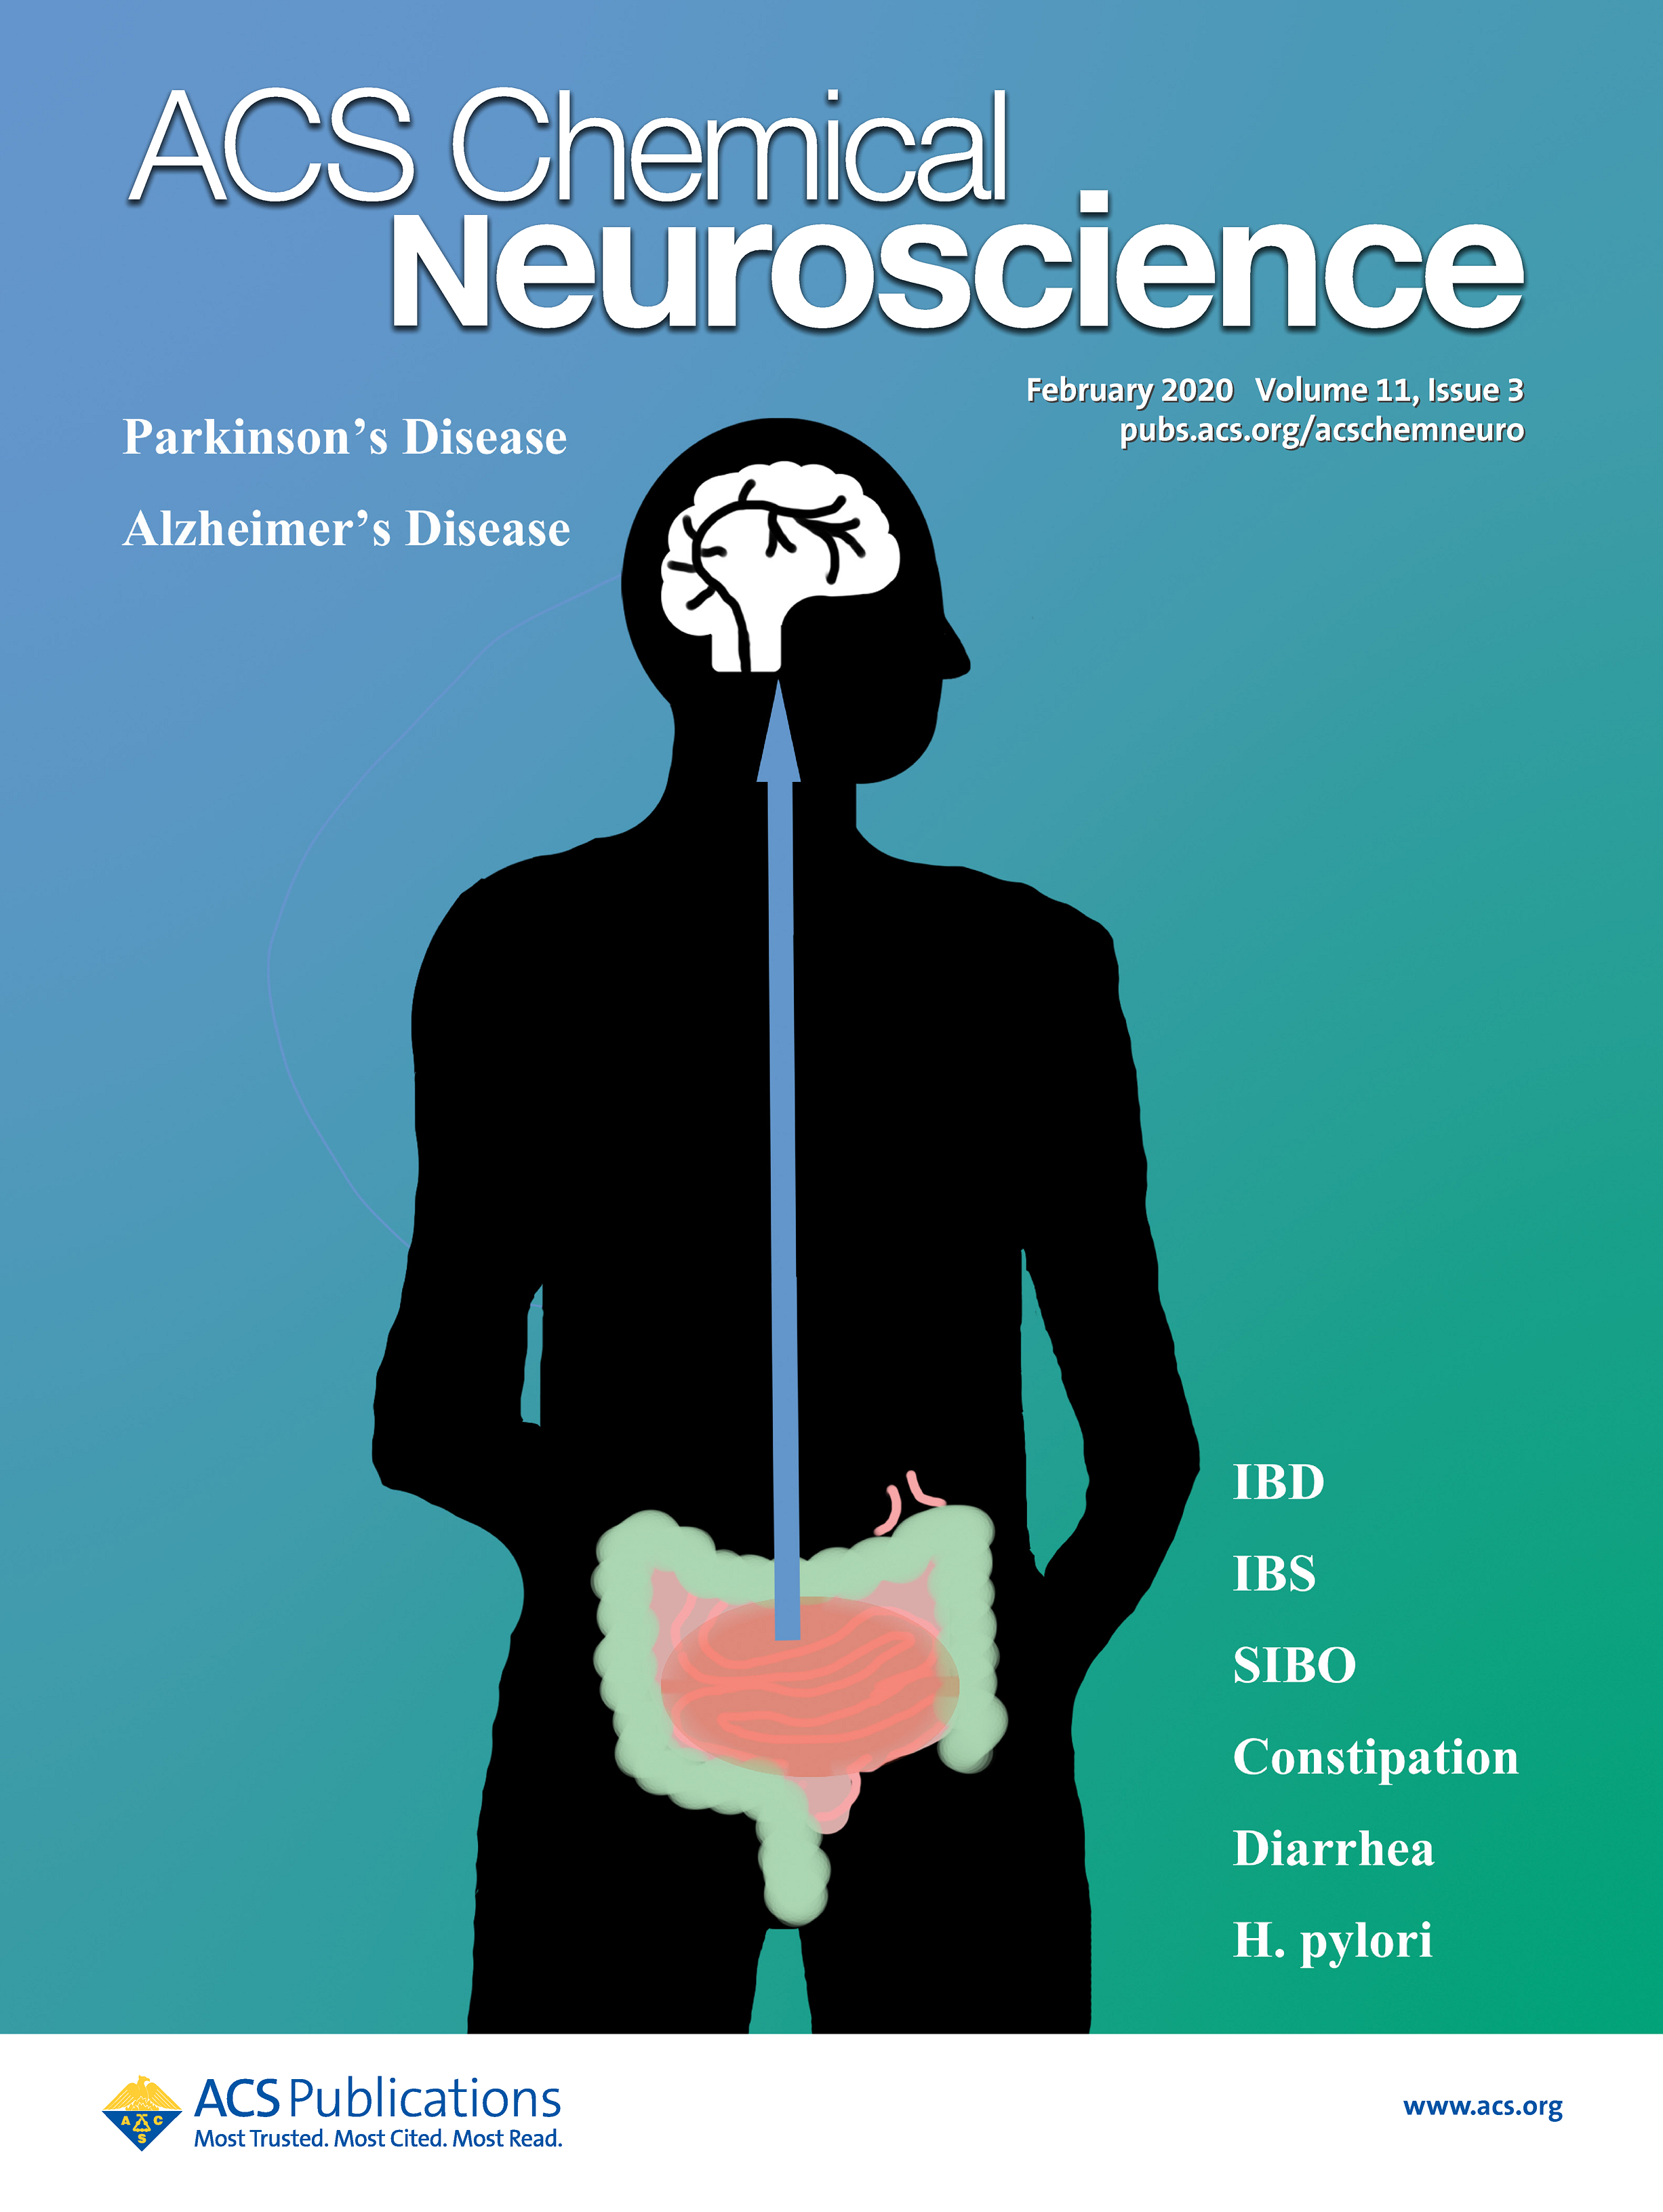 Association of Intestinal Disorders with Parkinson’s Disease and Alzheimer’s Disease: A Systematic Review and Meta-Analysis